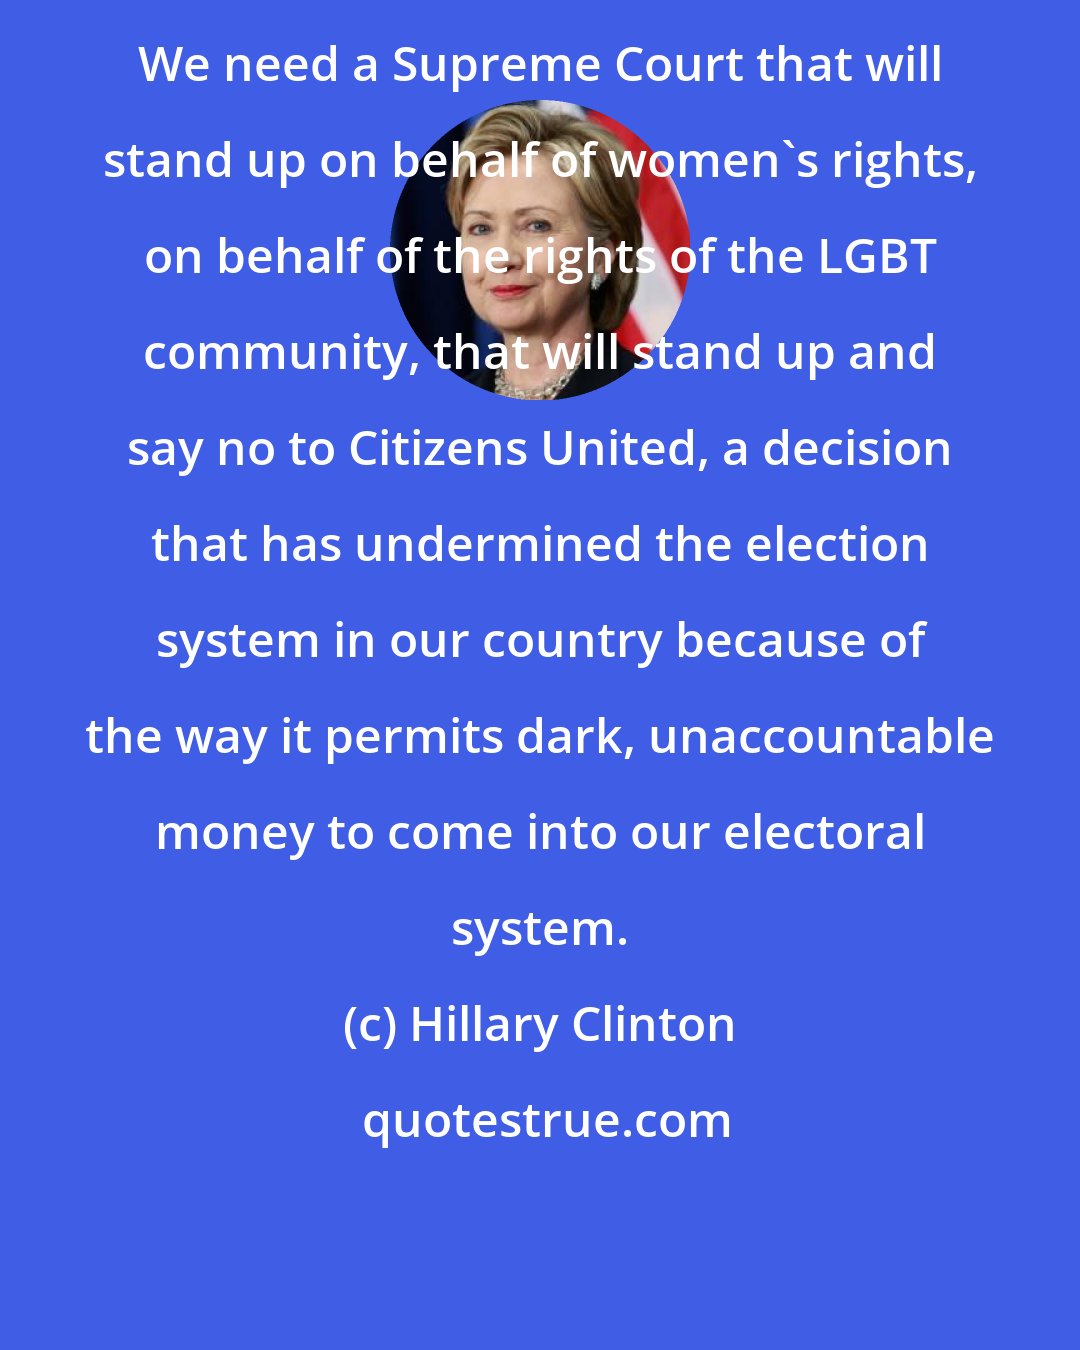 Hillary Clinton: We need a Supreme Court that will stand up on behalf of women's rights, on behalf of the rights of the LGBT community, that will stand up and say no to Citizens United, a decision that has undermined the election system in our country because of the way it permits dark, unaccountable money to come into our electoral system.